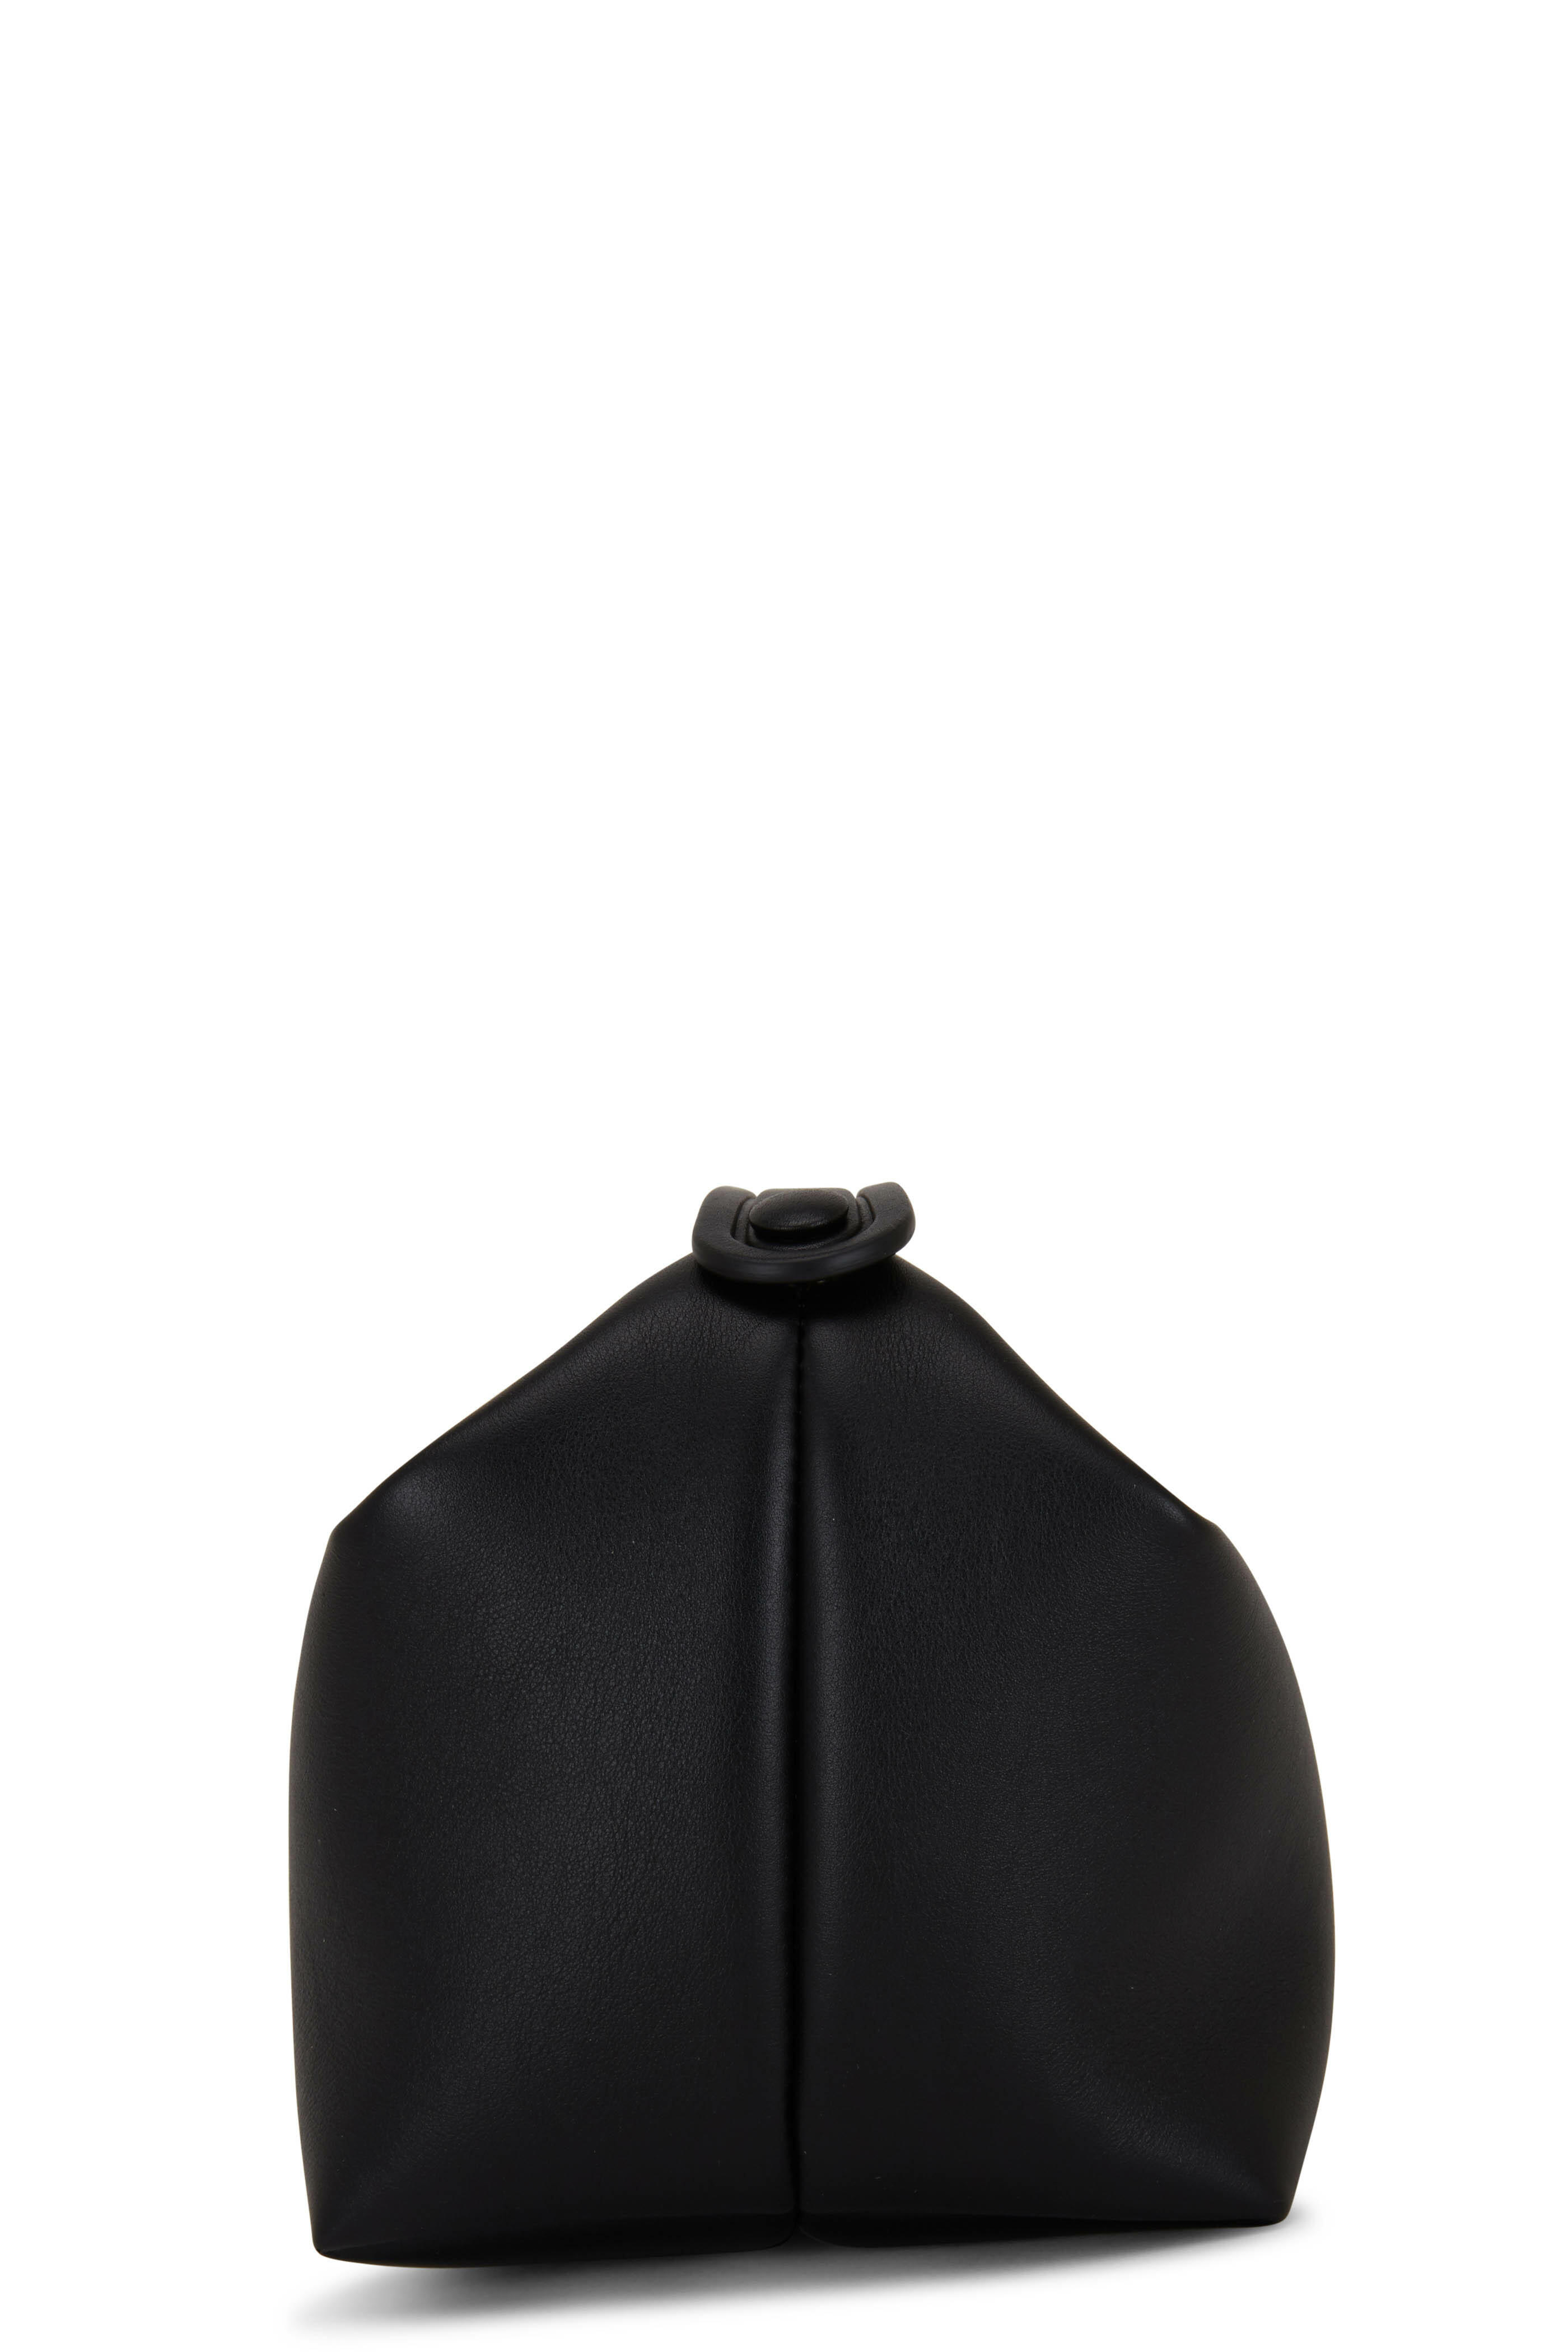 The Row - Les Bains Black Smooth Leather Top Handle Bag